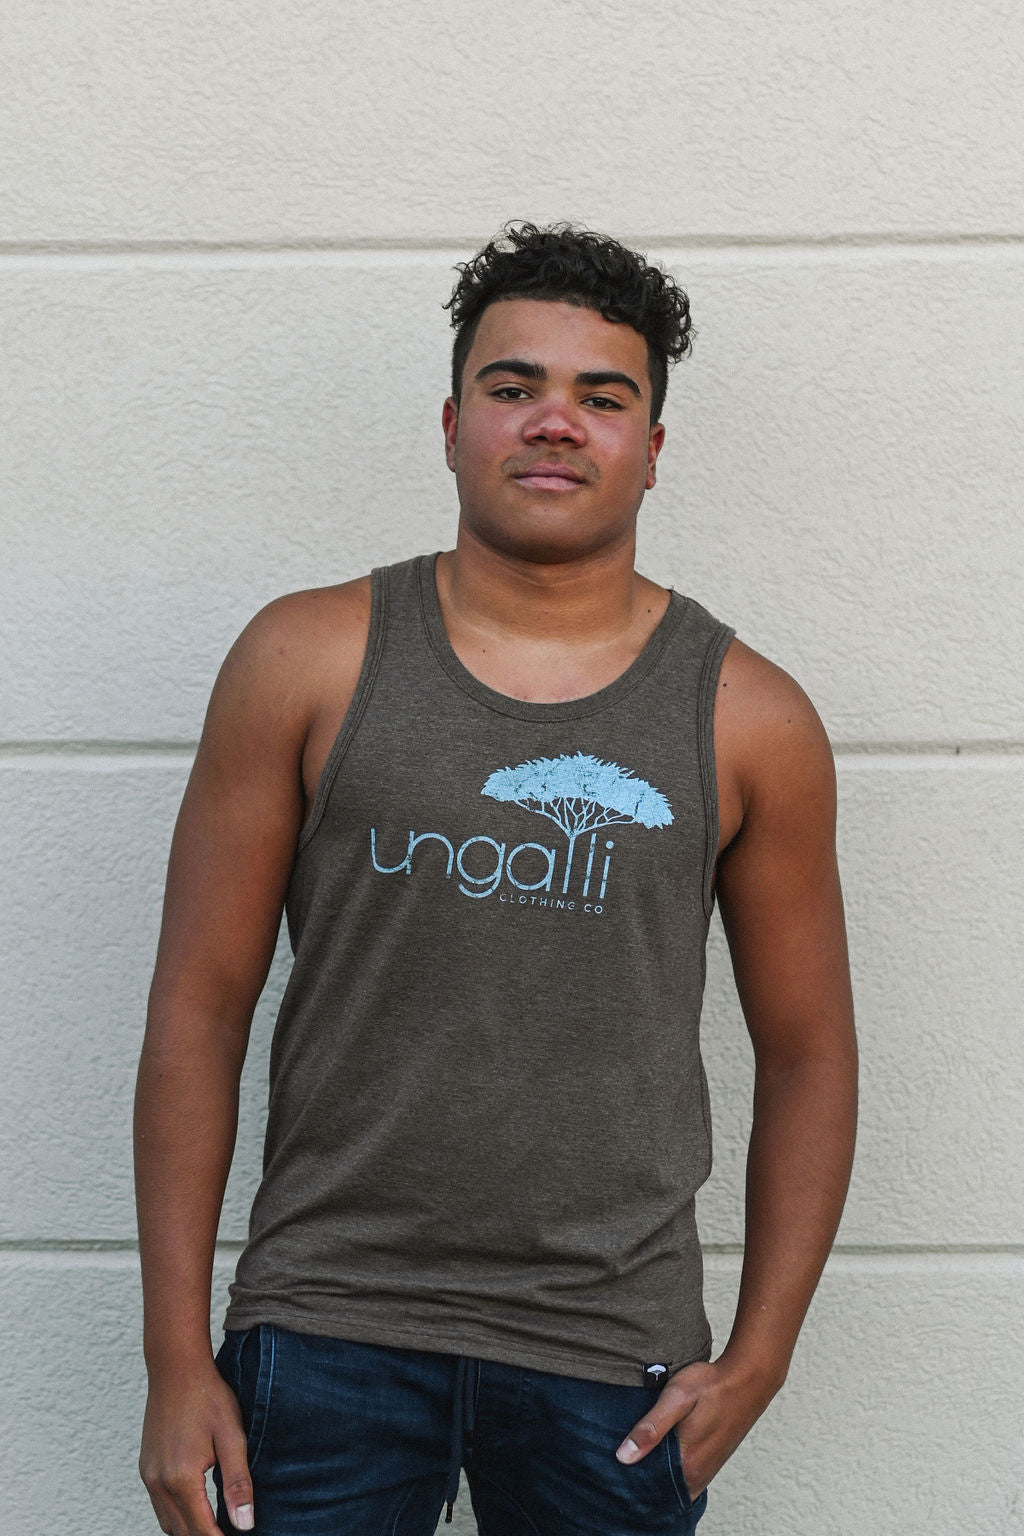 Brown men's organic tank top with blue Ungalli logo across front